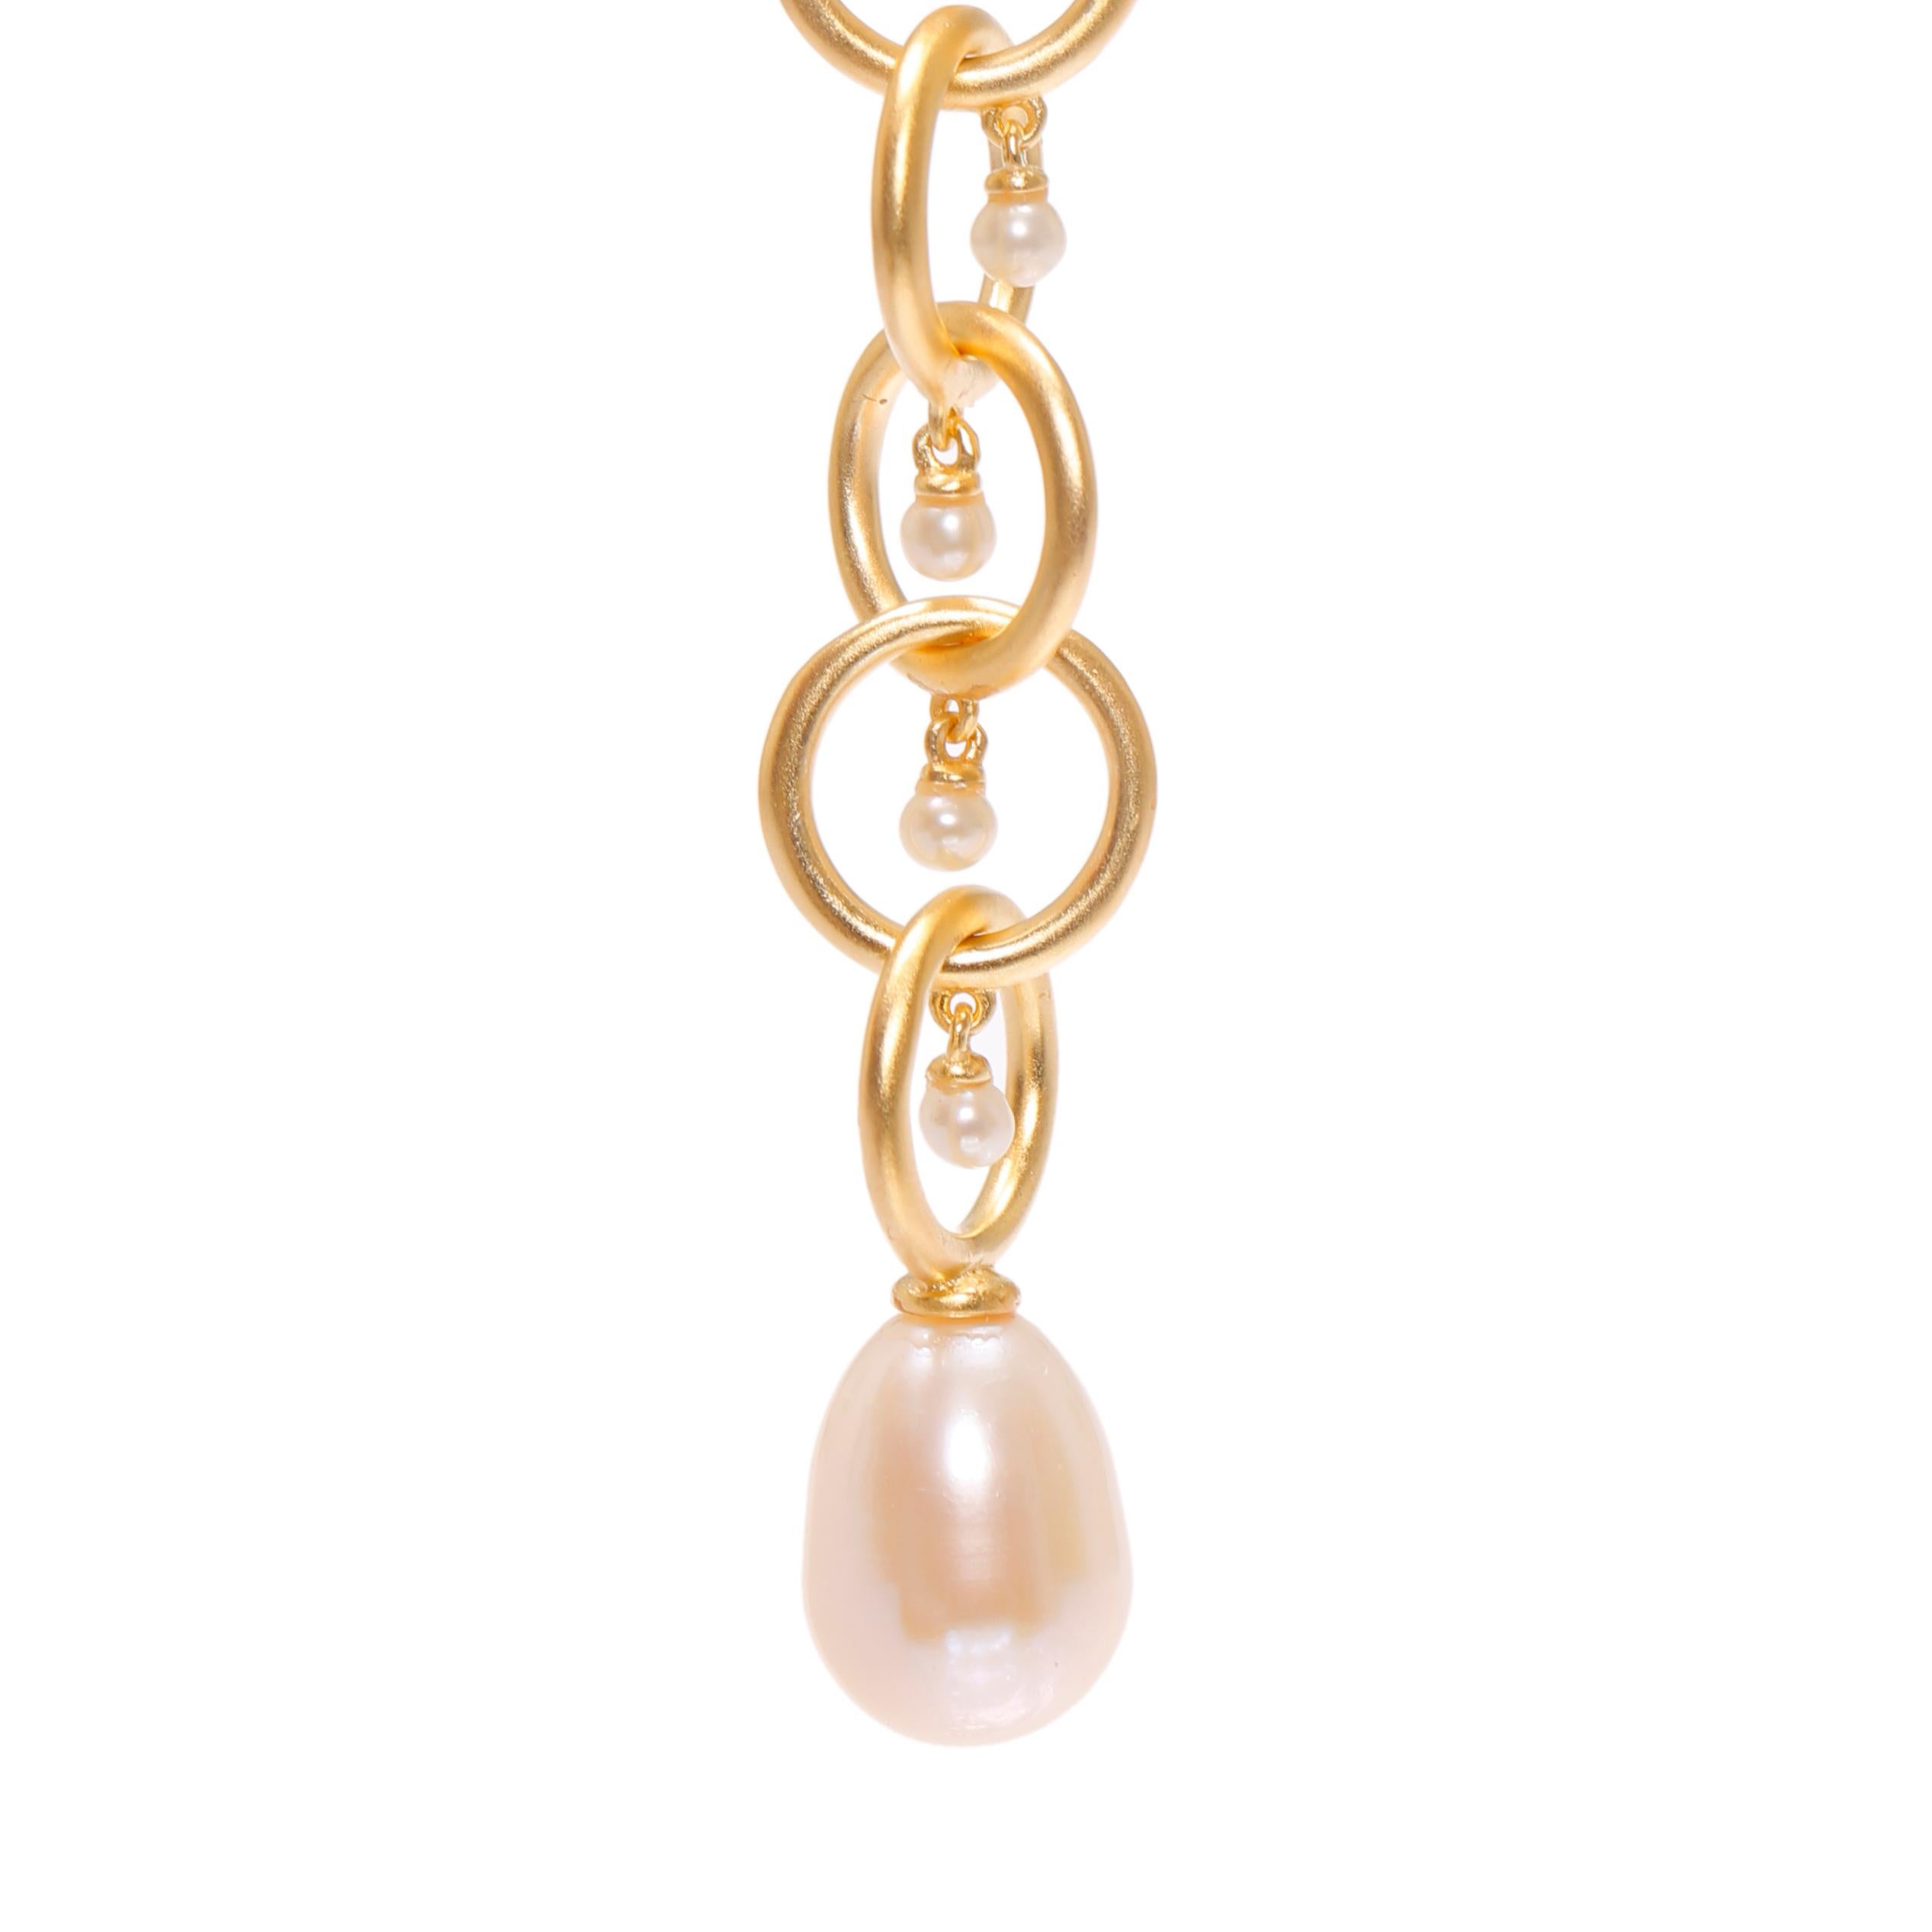 Contemporary Drop Links Earrings the Rebel Queen Nefertiti with Moonstone and Pearls